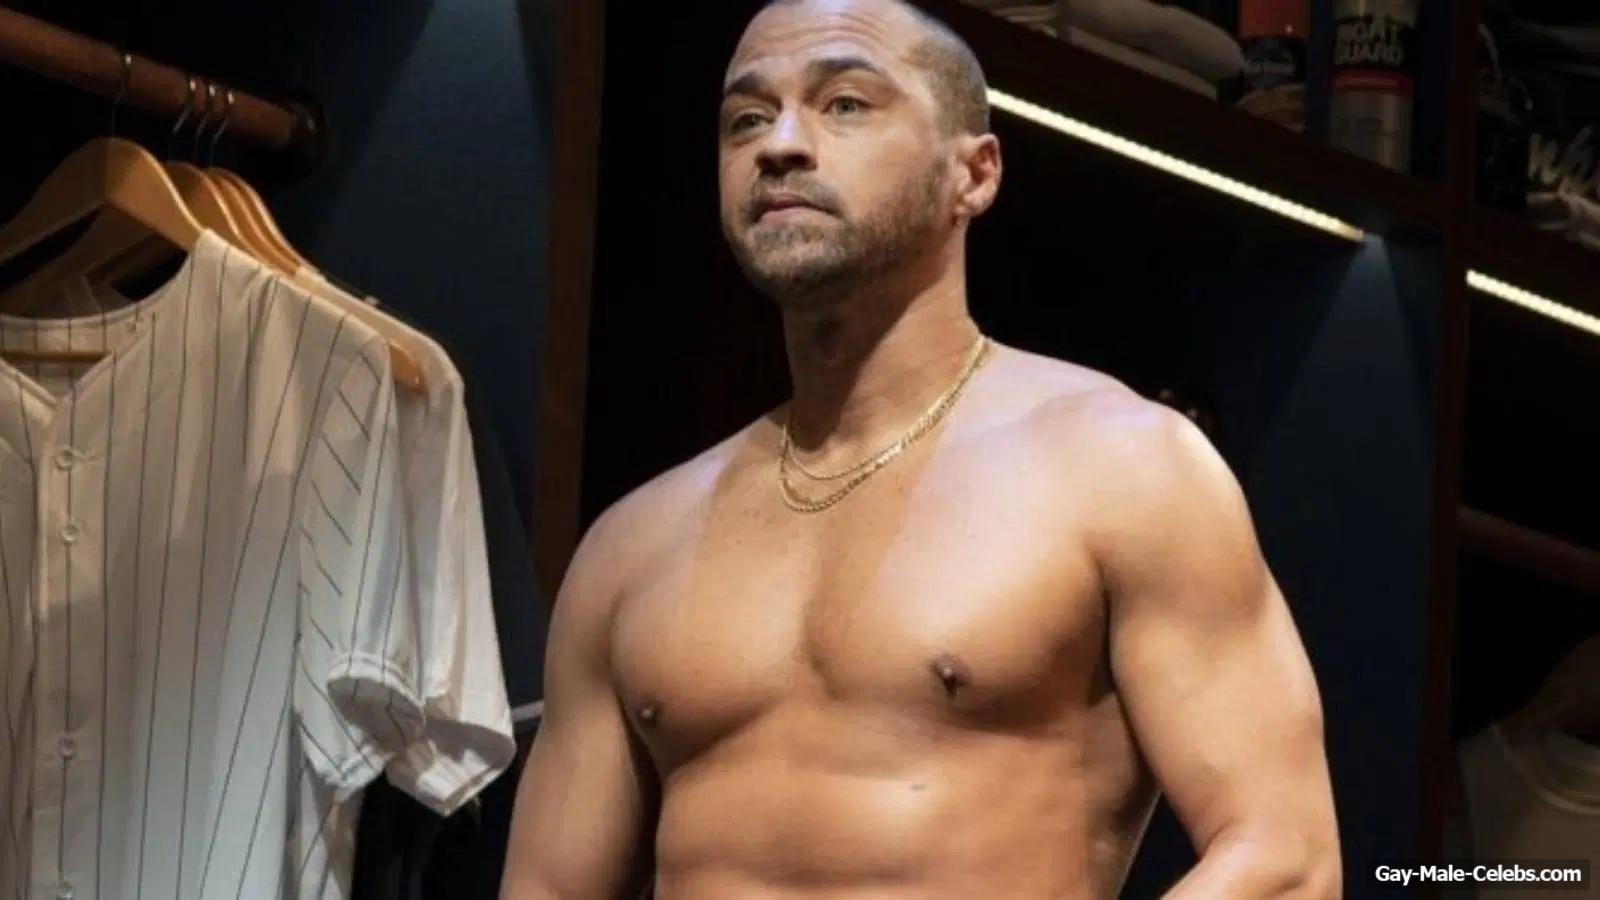 A video from a Broadway show has been leaked showing Jesse Williams frontally naked!